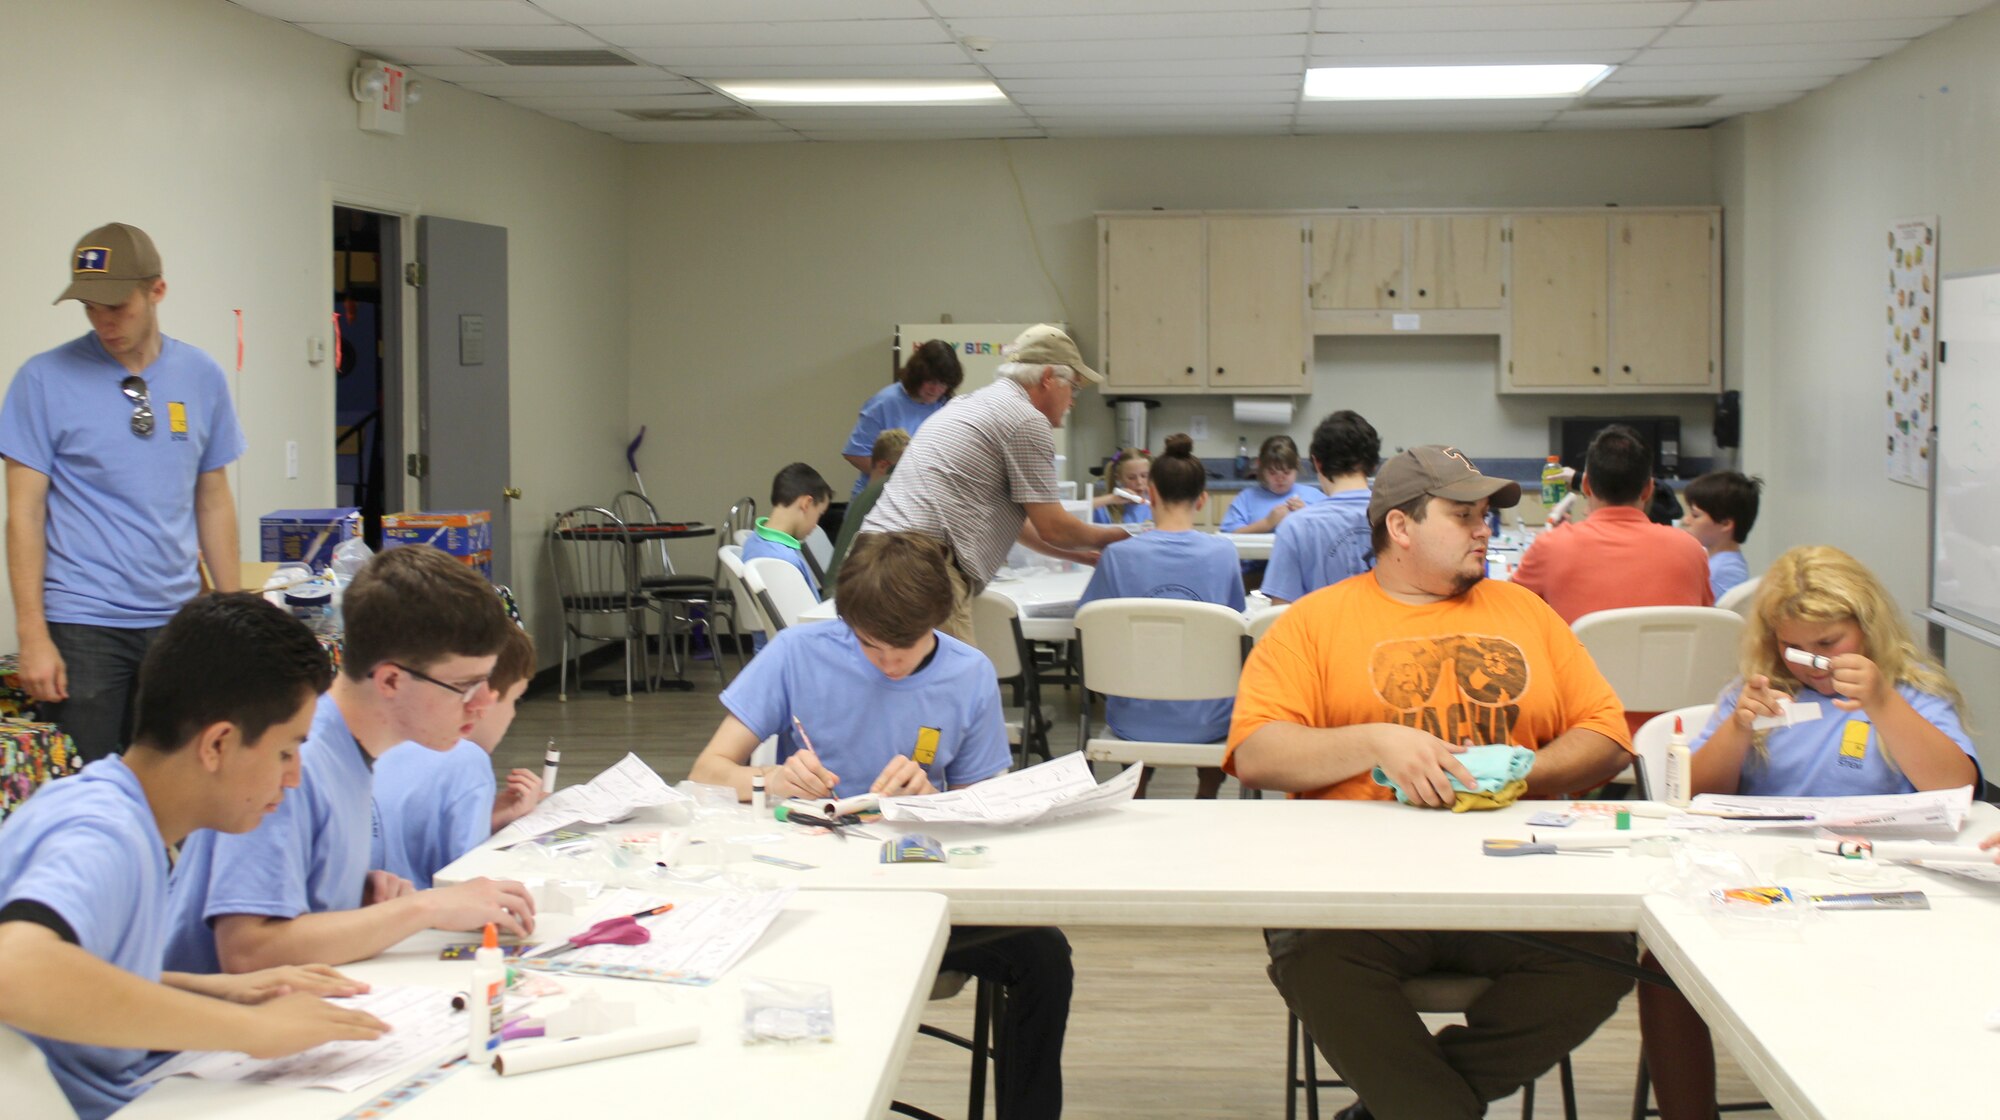 Participants of the Reach for the Stars competition held June 2 at the Hands-On Science Center work on building and designing their rockets. Students ages 10-18 from across southern middle Tennessee were invited to participate in the event. (Courtesy photo)